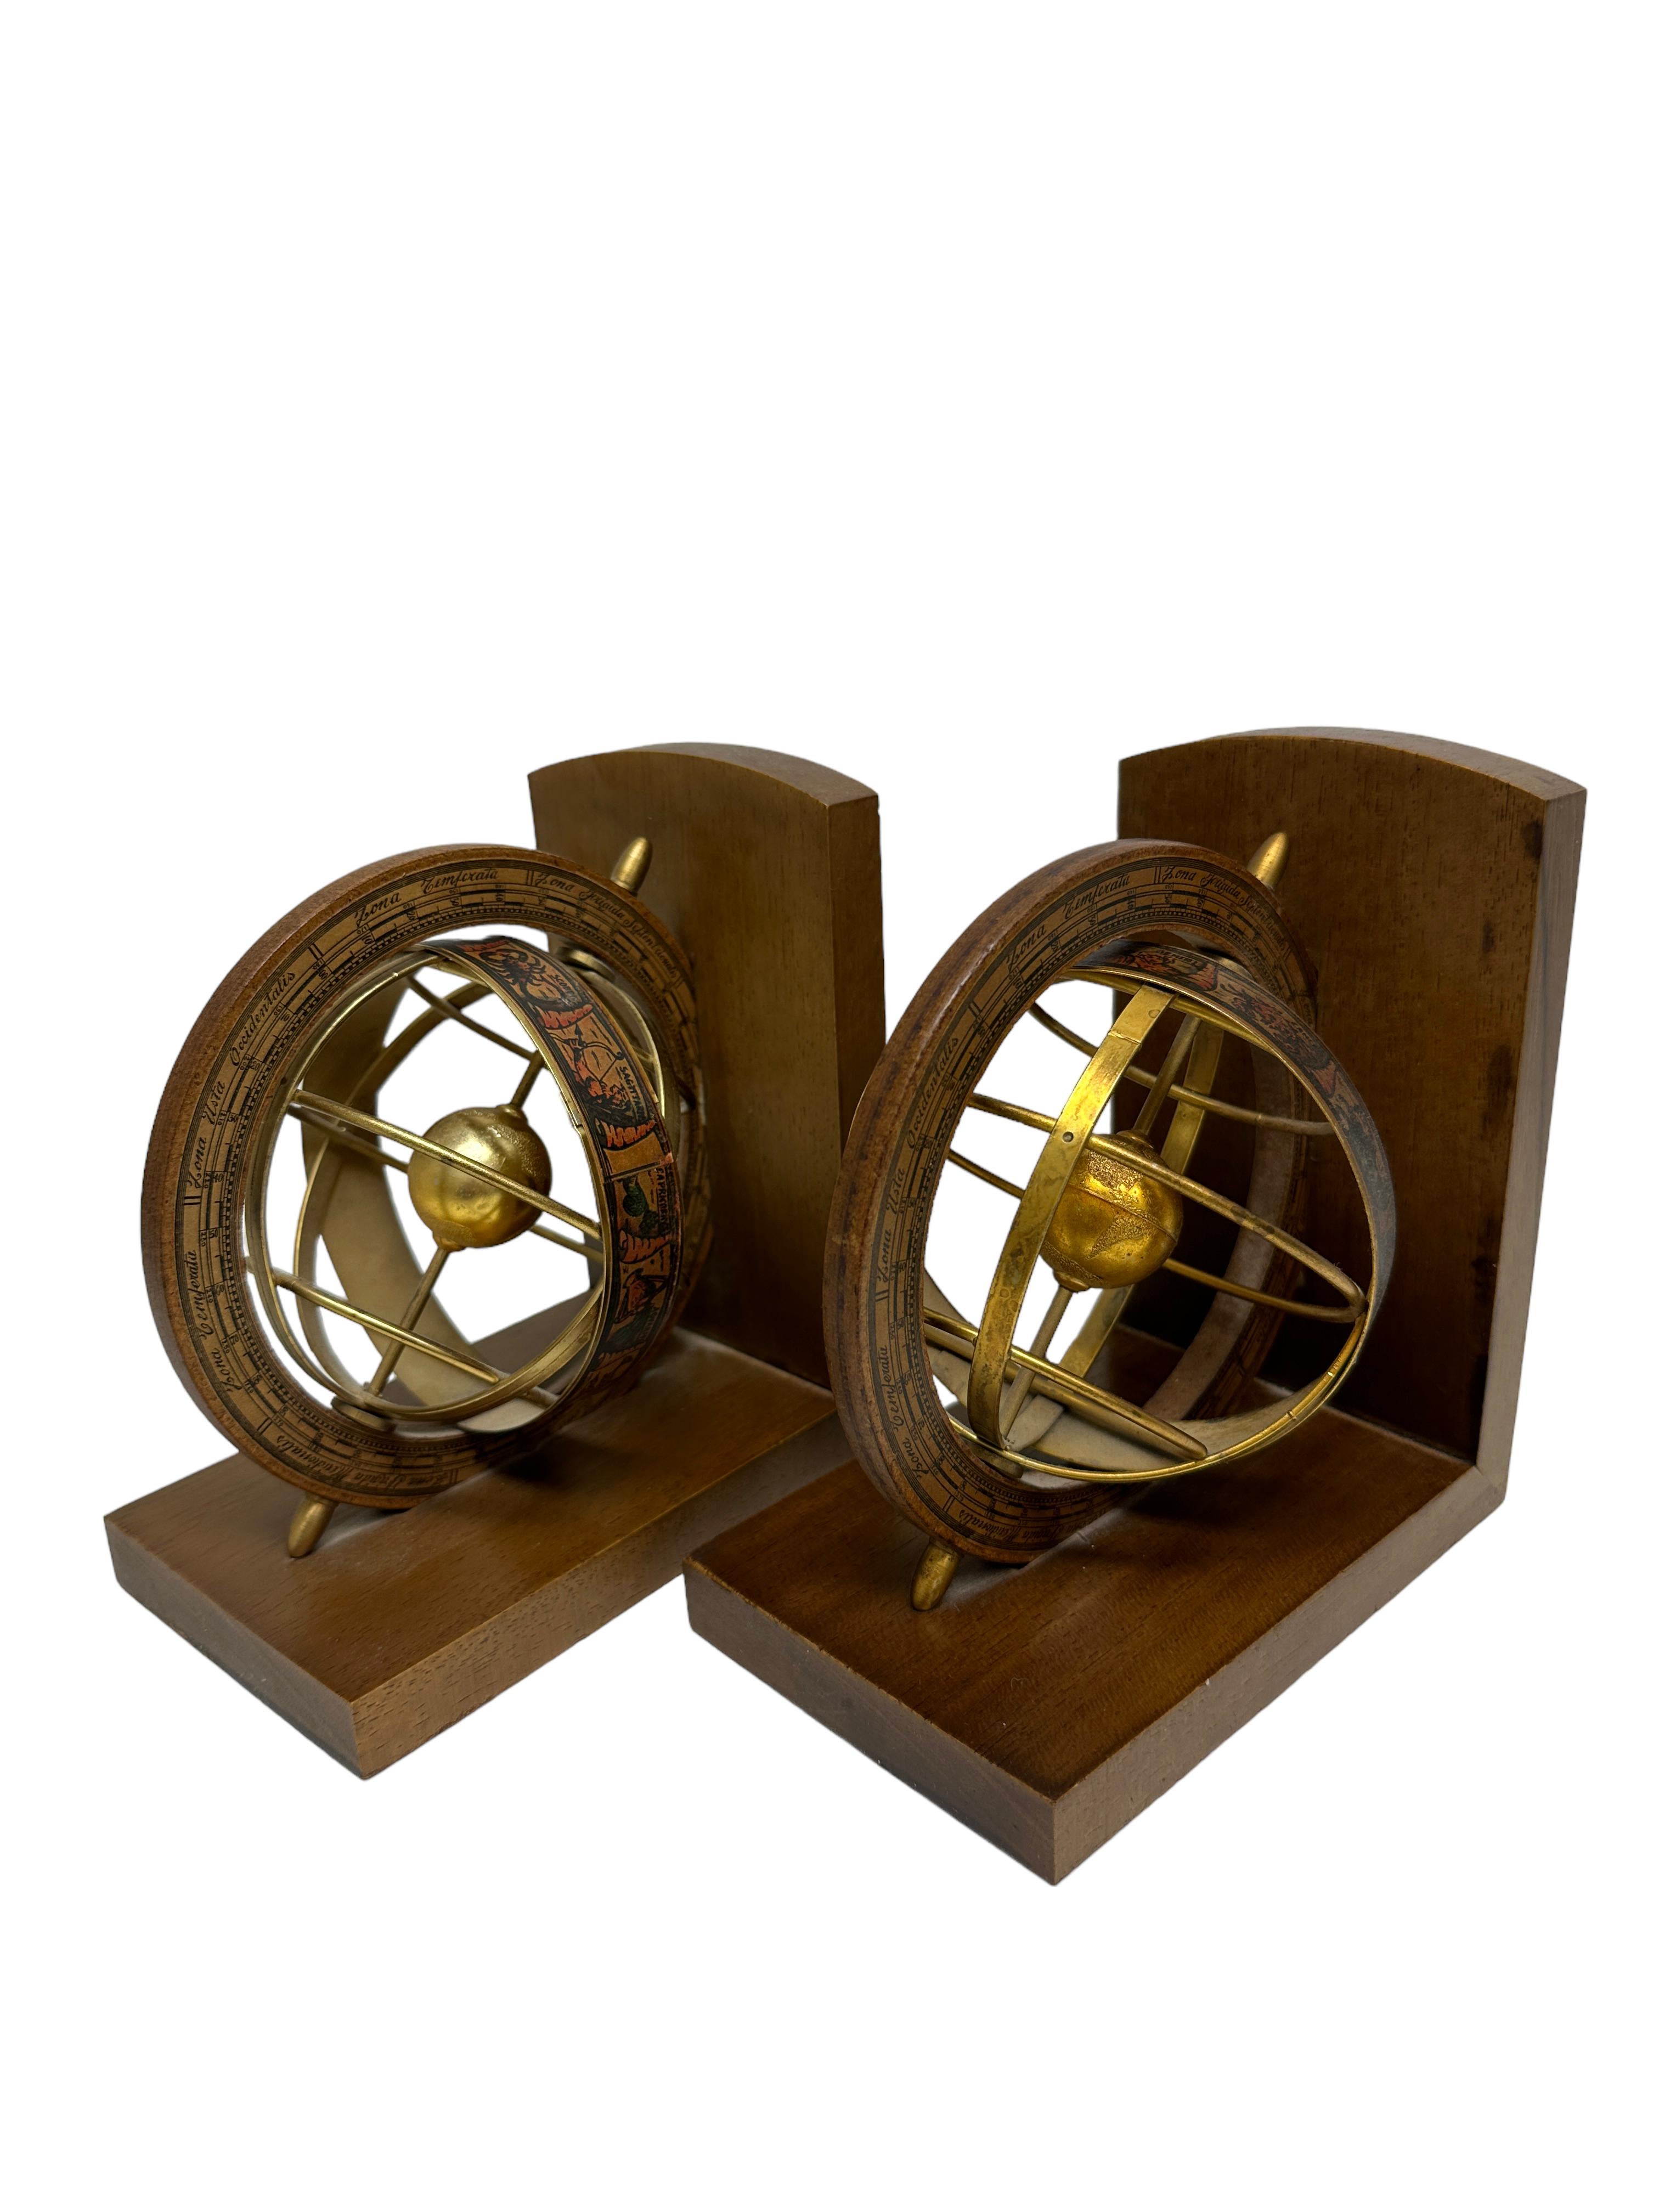 A decorative set of two bookends. Some wear with a nice patina, but this is old-age. Made of brass, copper and a wooden. Found at an estate sale in Vienna, Austria and was made probably in the 1960s. You can use it also as a paperweights on your